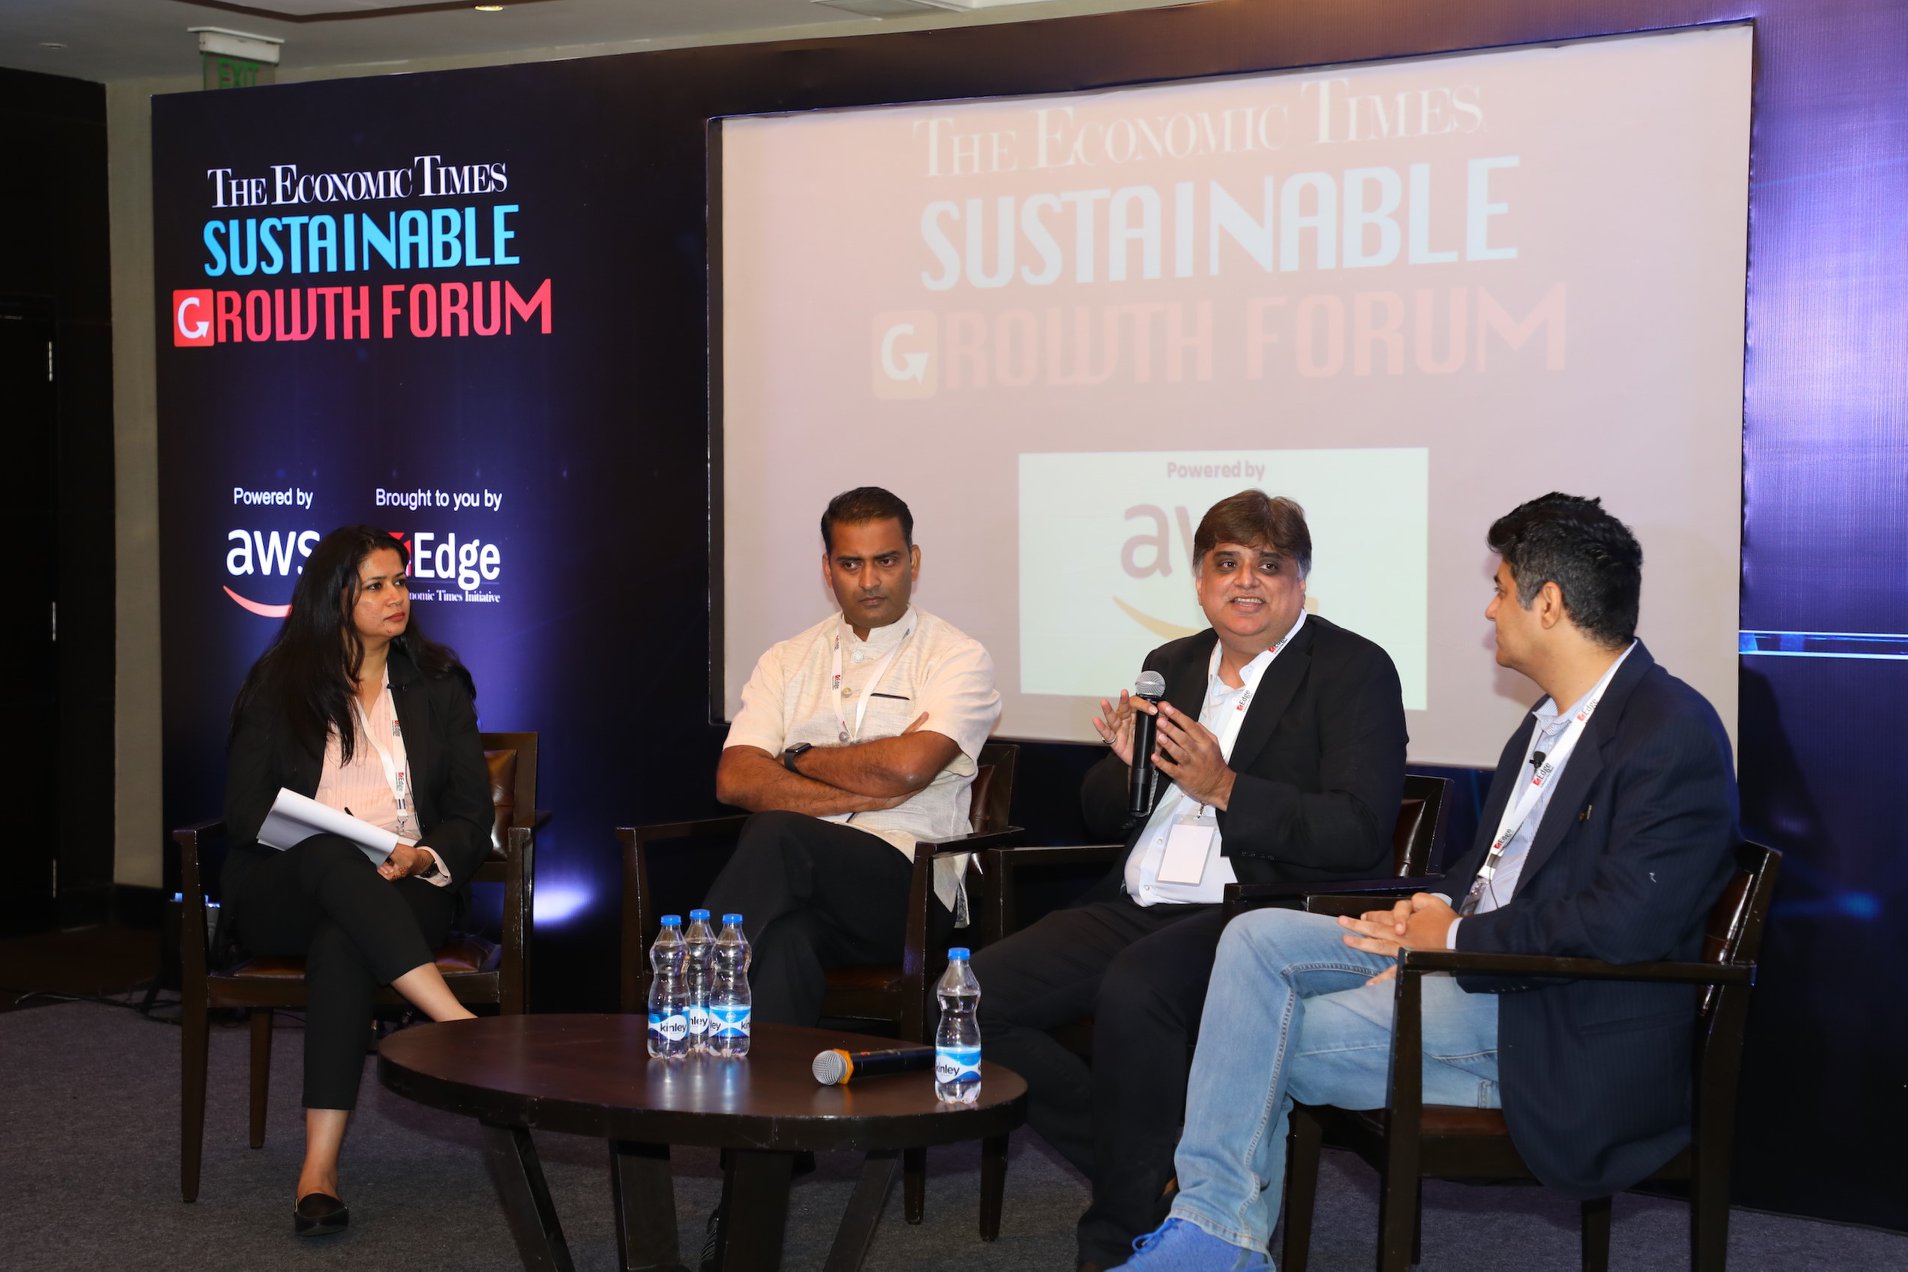 The Economic Times Sustainable Growth Forum